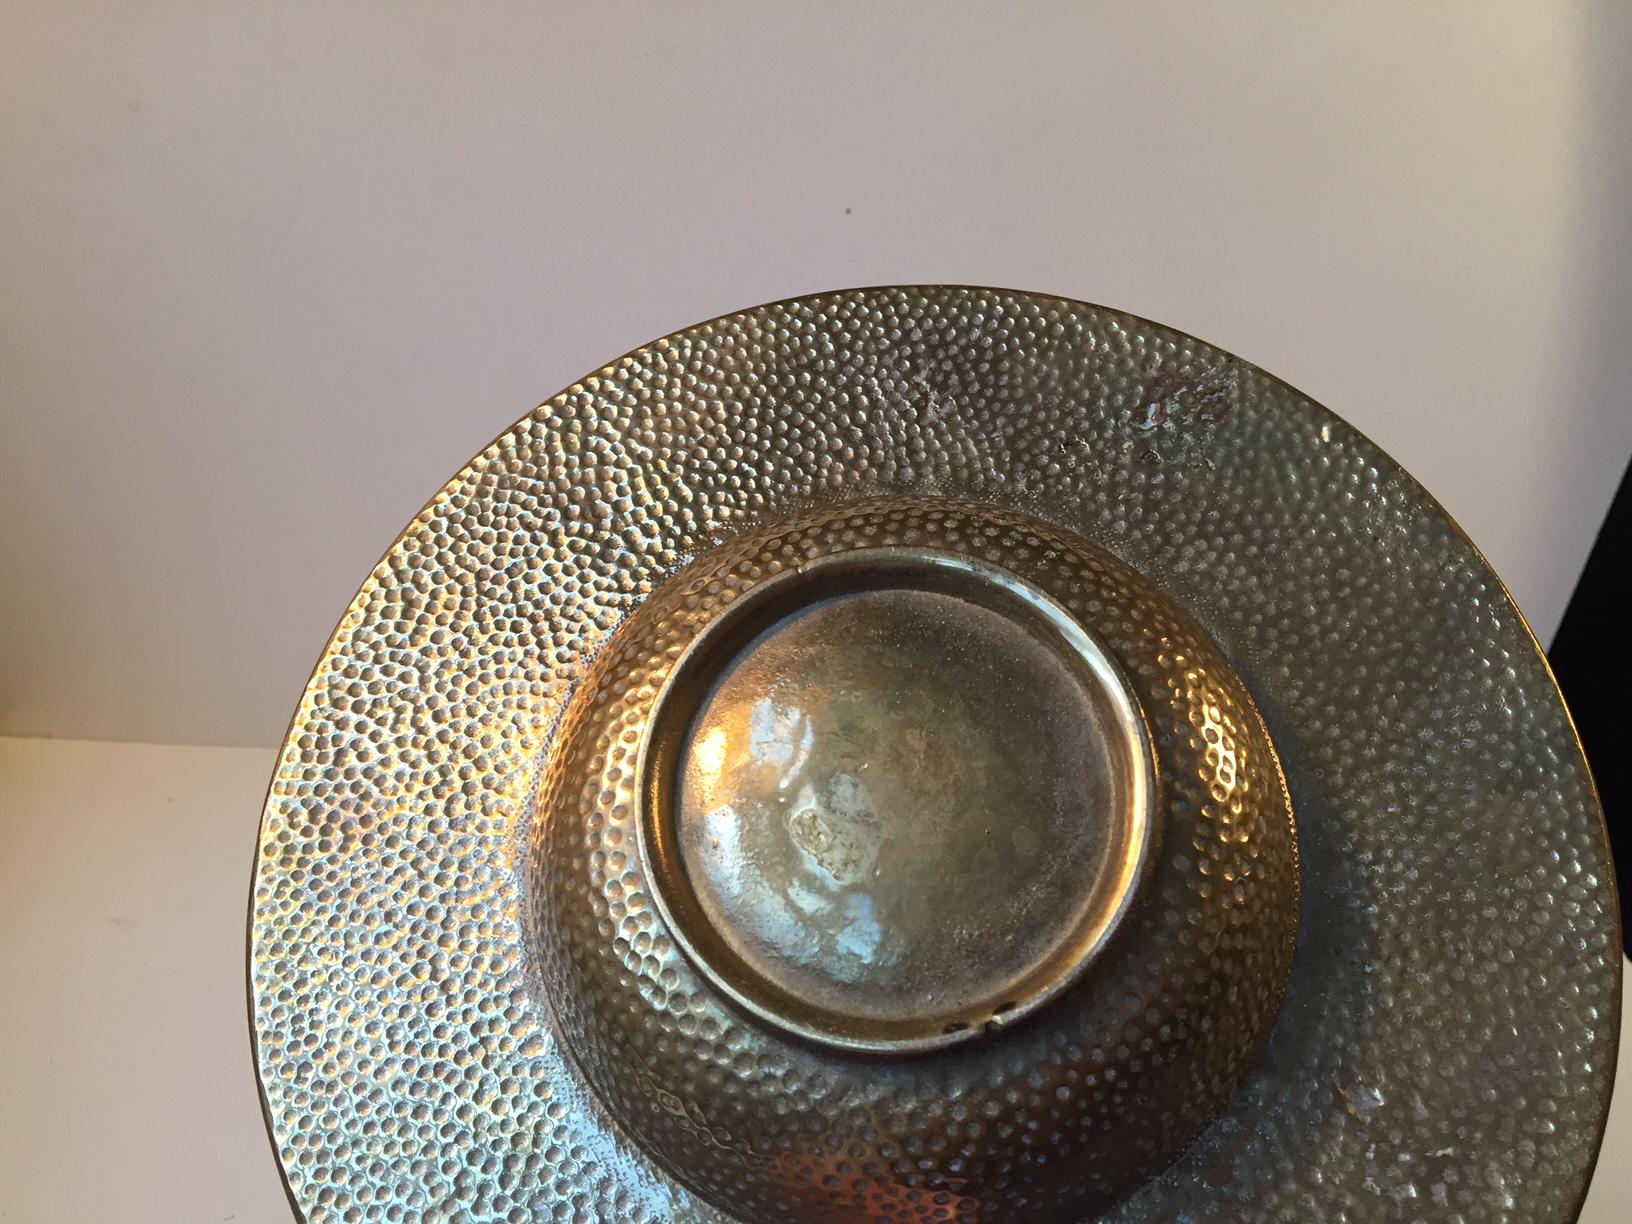 Mid-Century Modern Danish Zodiac Bronze Bowl with Moon Texturing from Nordisk Malm, 1940s